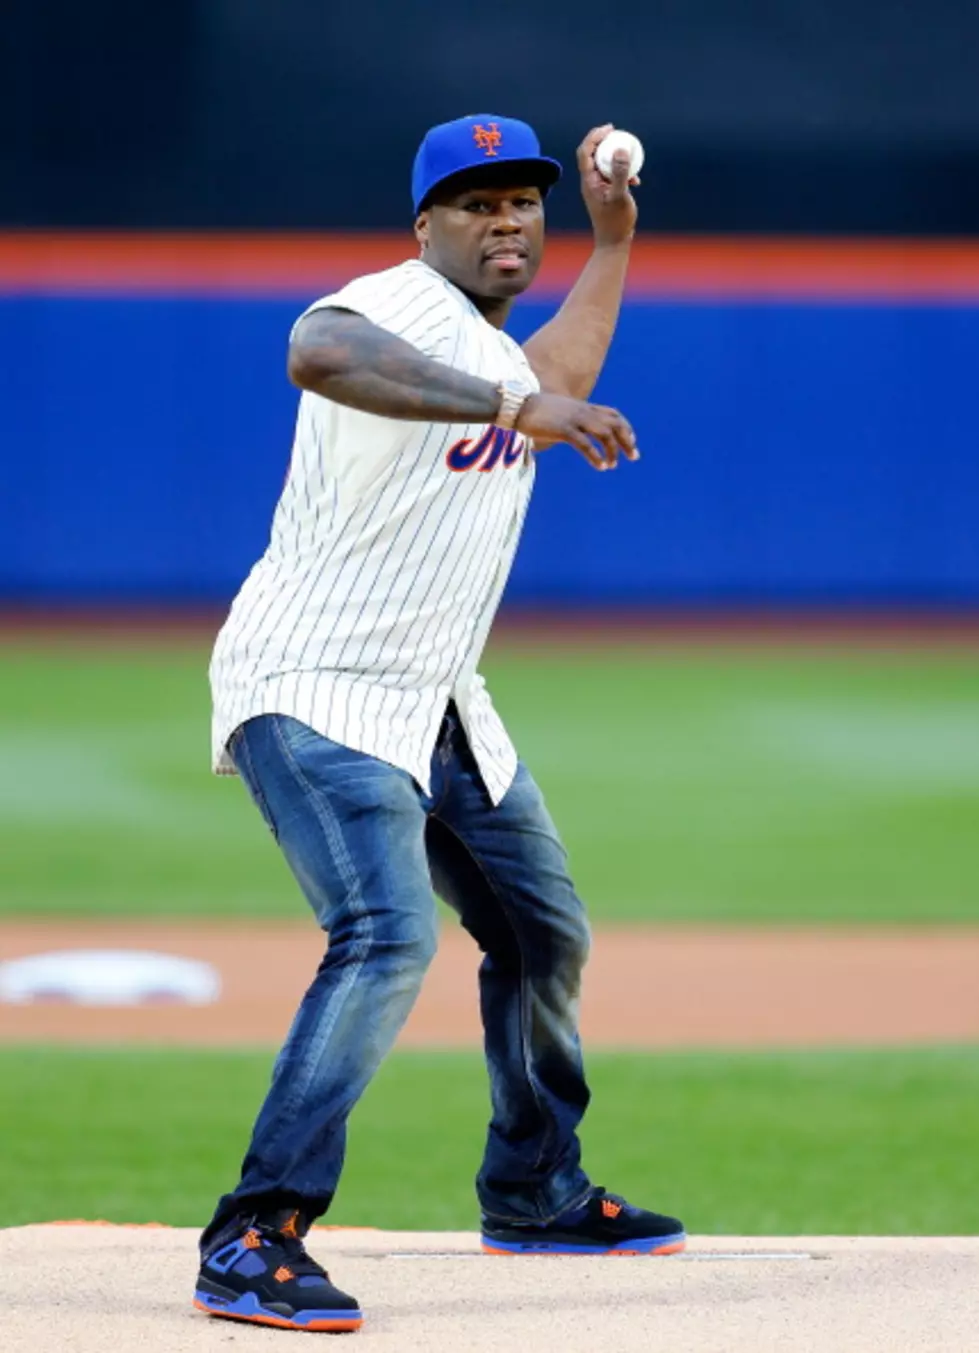 Worst celebrity first pitch ever?